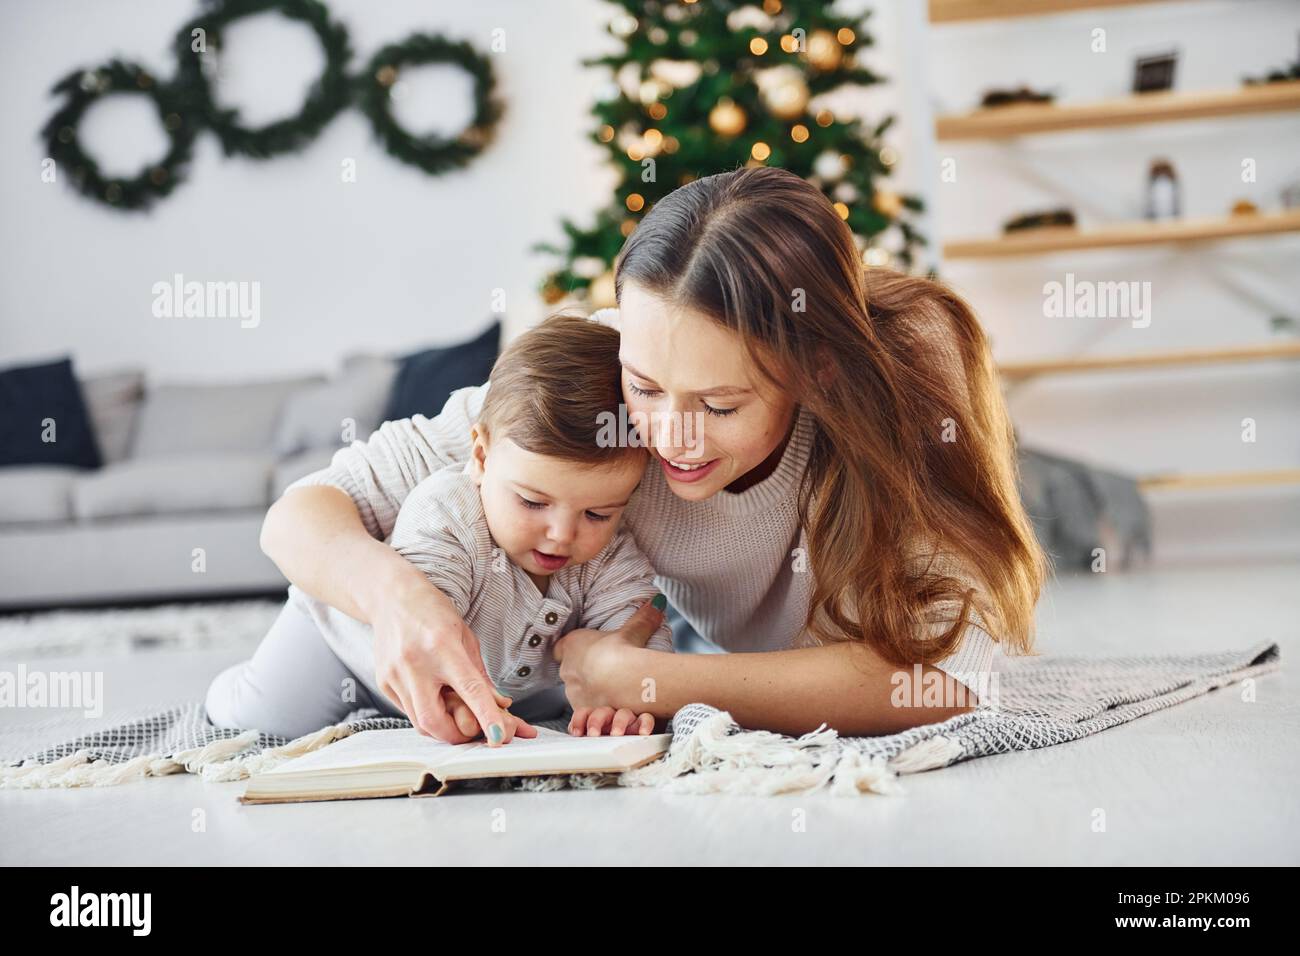 Sitting on the ground. Mother with her little daughter is indoors at home together. Stock Photo